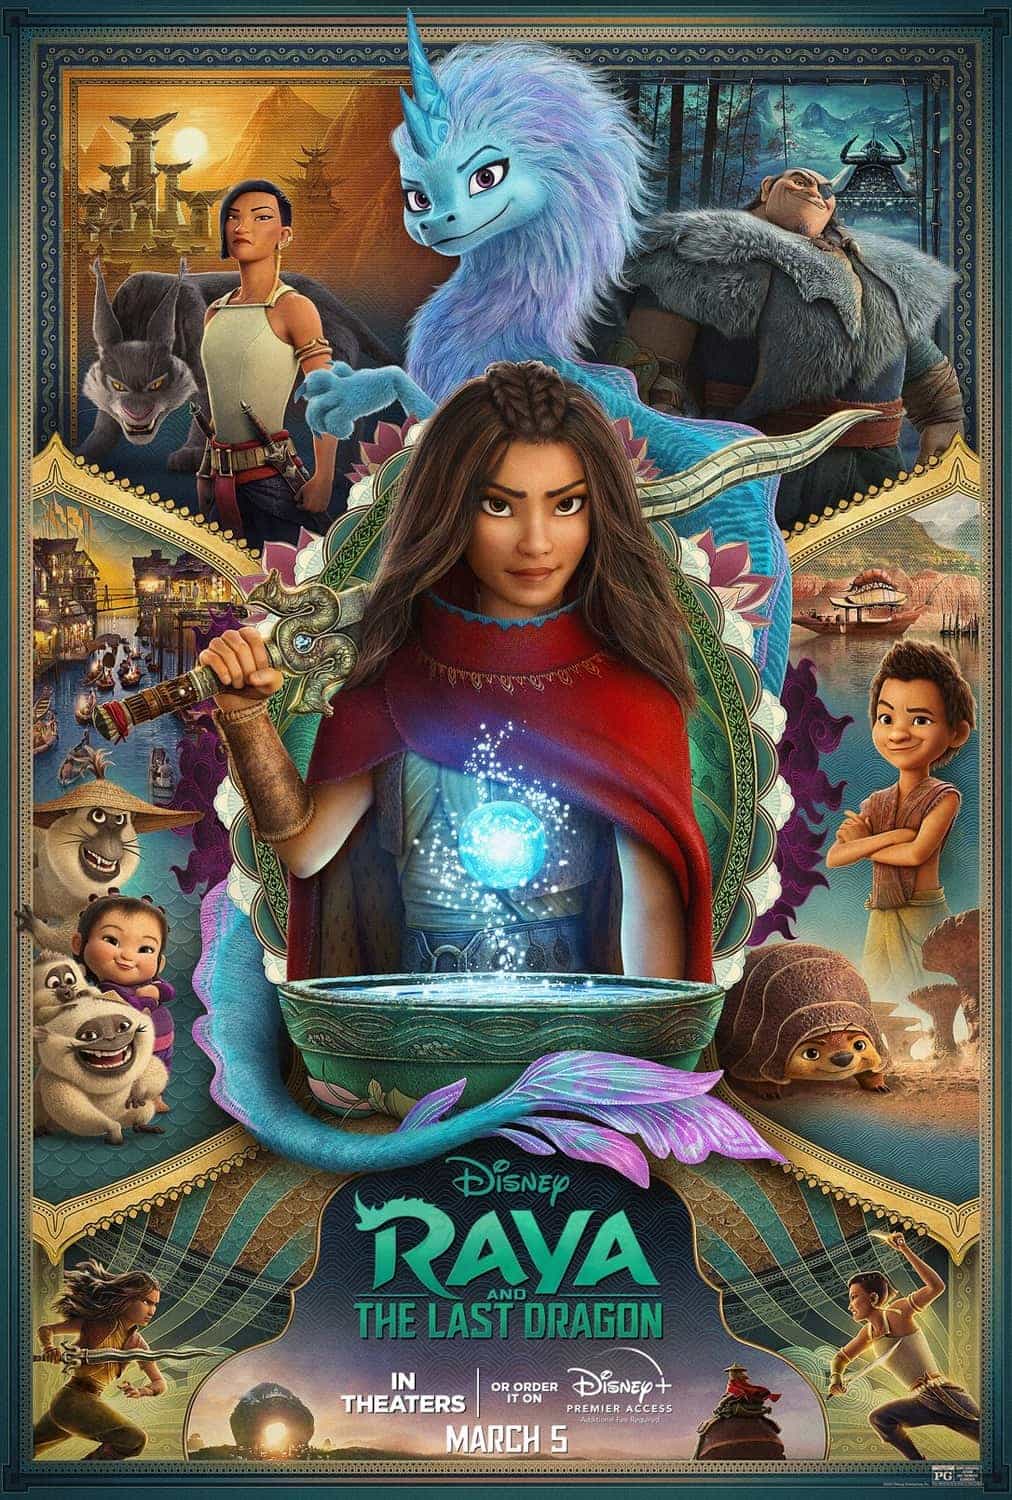 New trailer and poster release for Raya And The Last Dragon starring Kelly Marie Tran - movie release date 5th March 2021